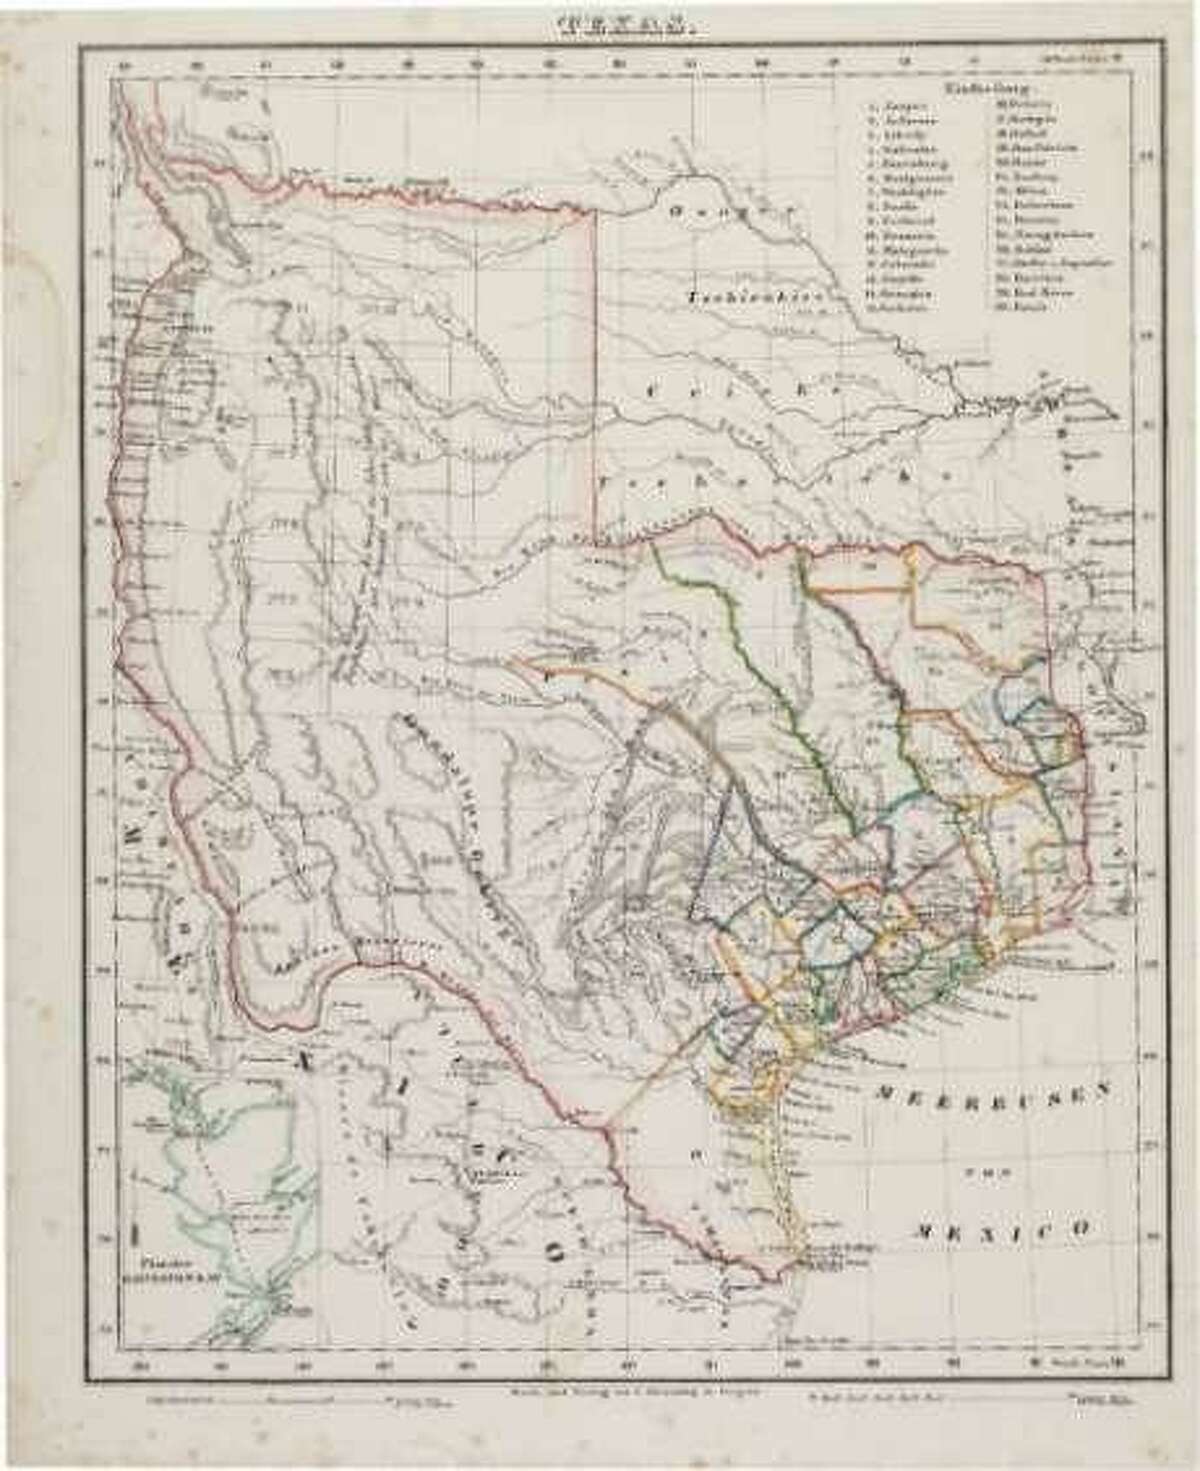 Shown is a Carl Flemming map of Texas. The early Republic of Texas map detailed the original boundaries as well as towns and the locations of Indian tribes. Republic of Texas maps are rare and high-priced artifacts of when Texas was its own country.